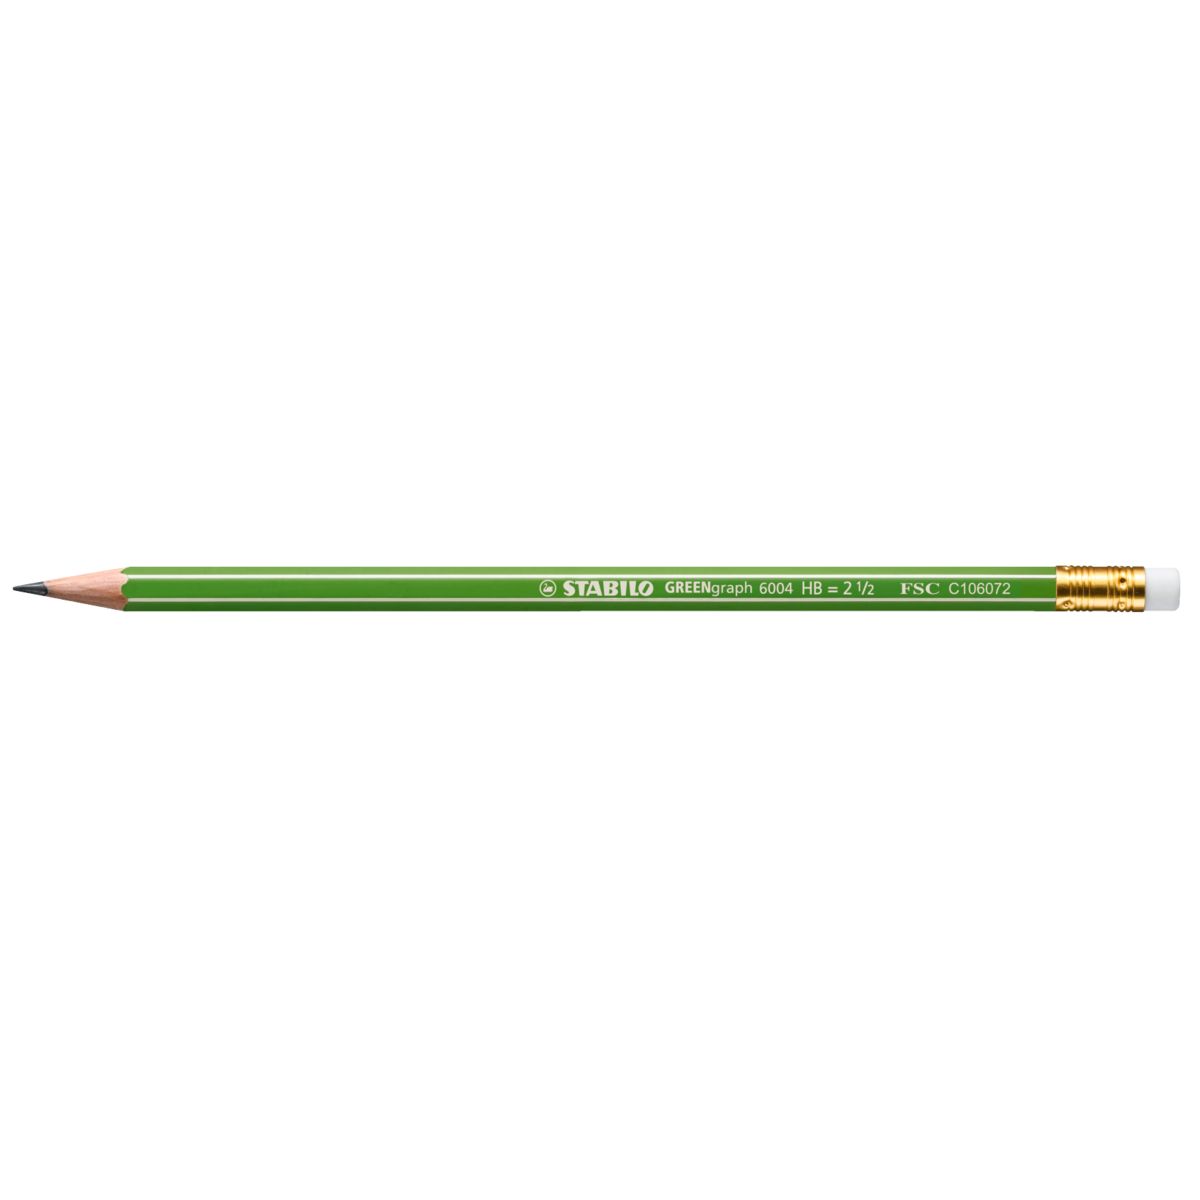 STABILO 3 Crayons GREENgraph avec gomme, HB = 2 1/2